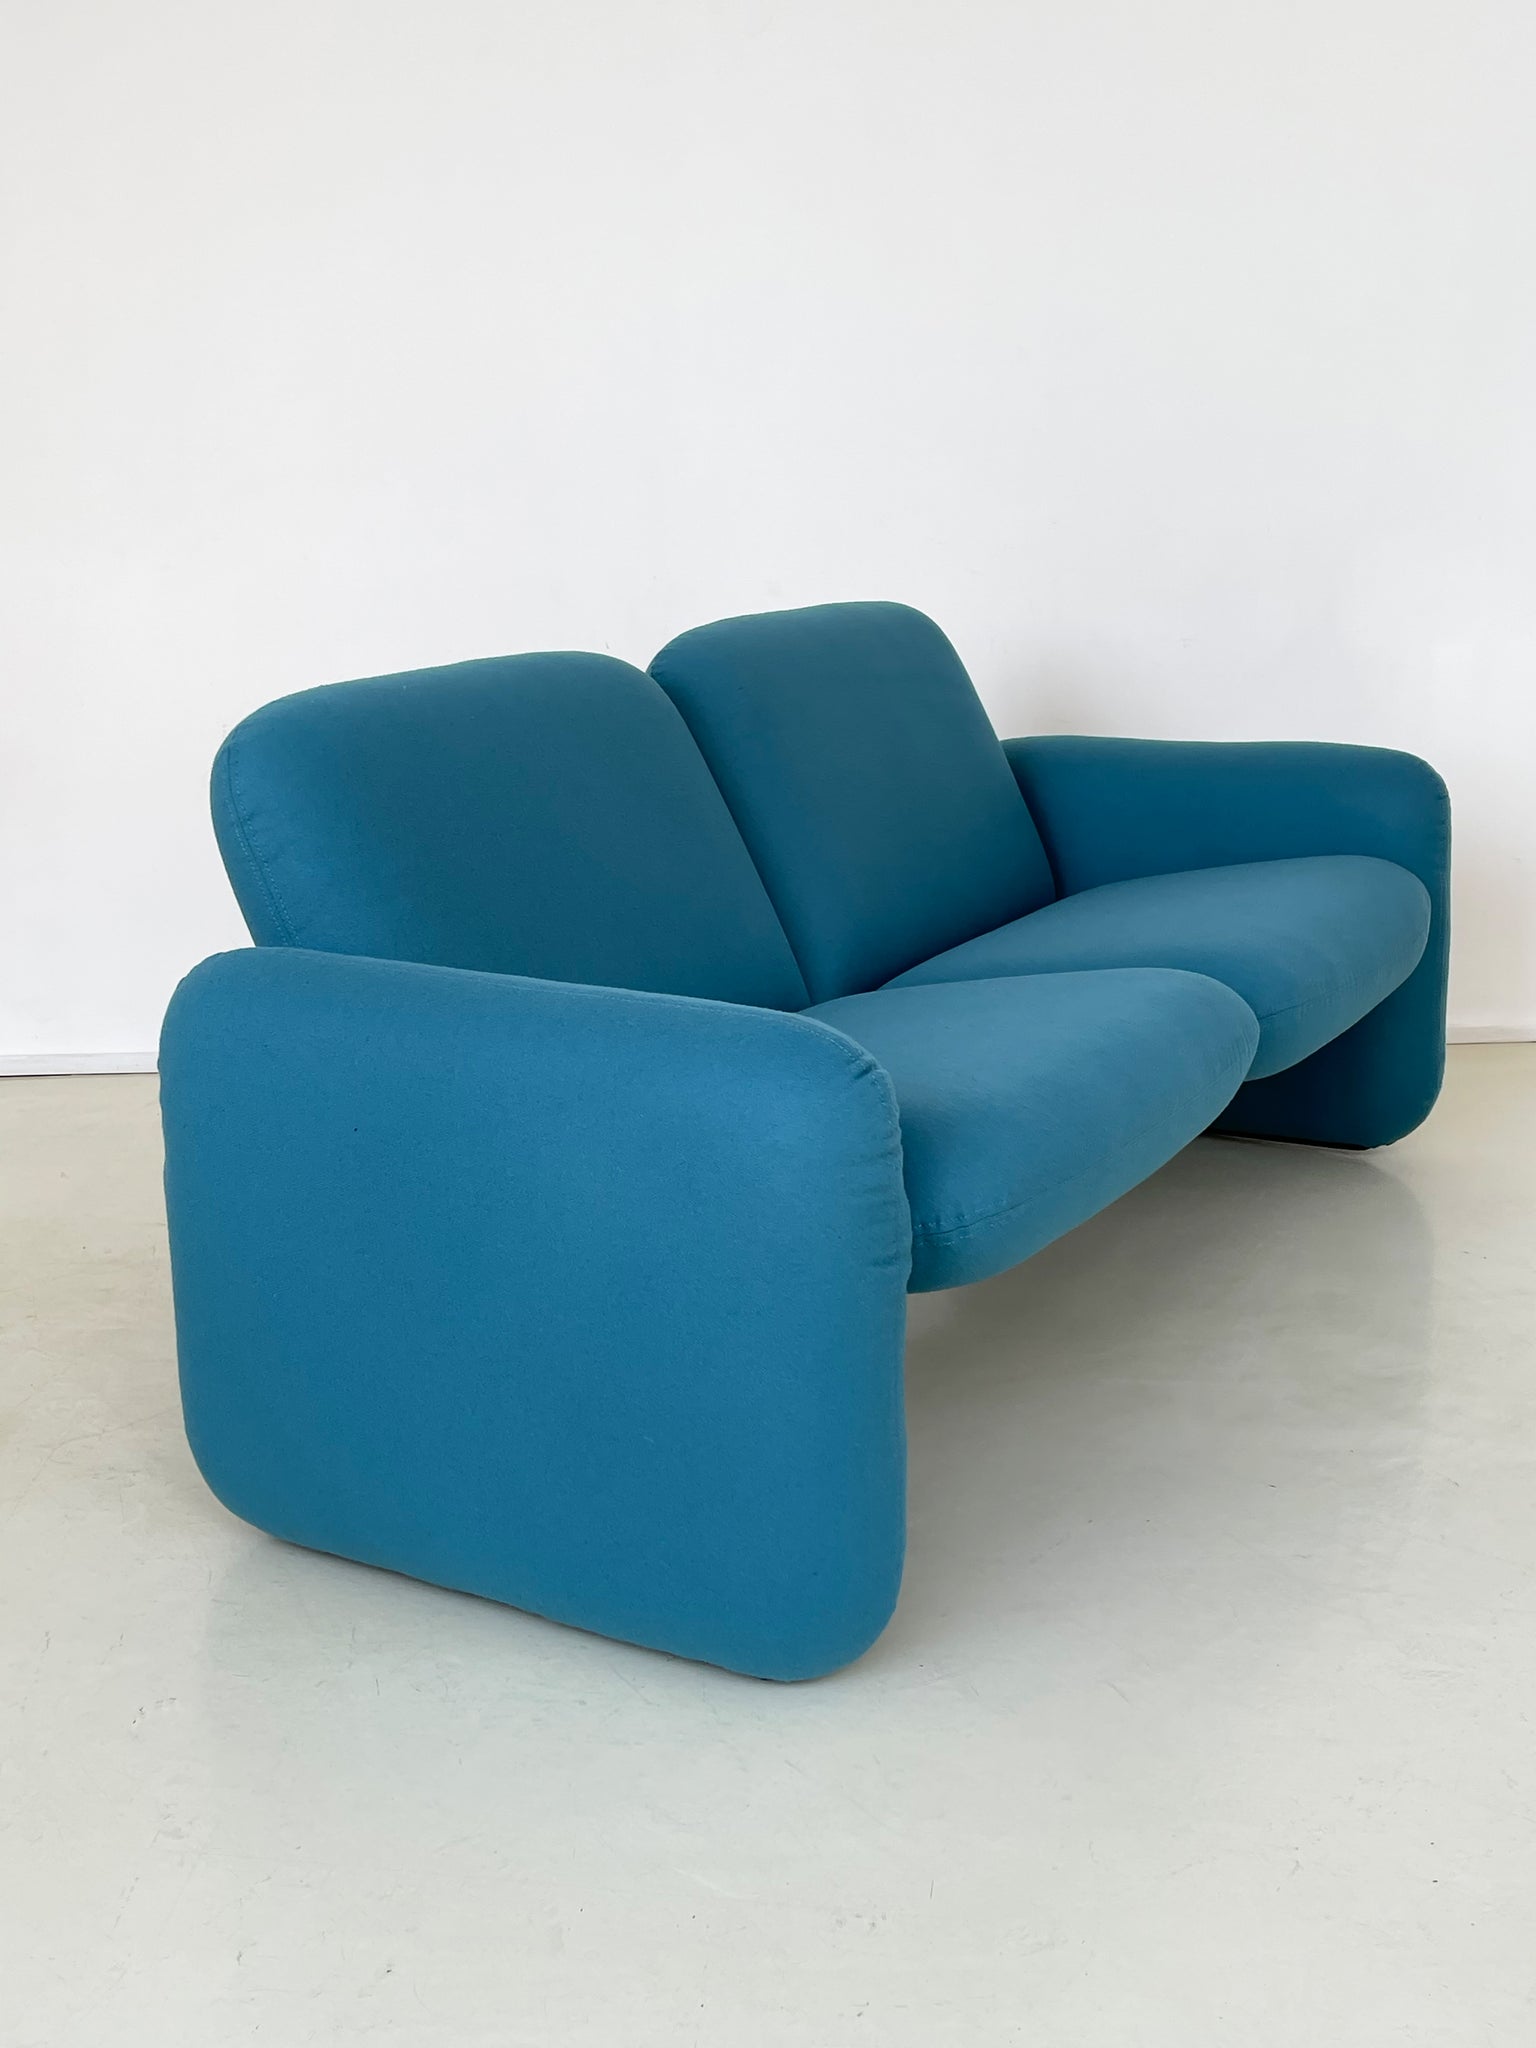 1970s Teal Ray Wilkes Chiclet 2-Seater for Herman Miller